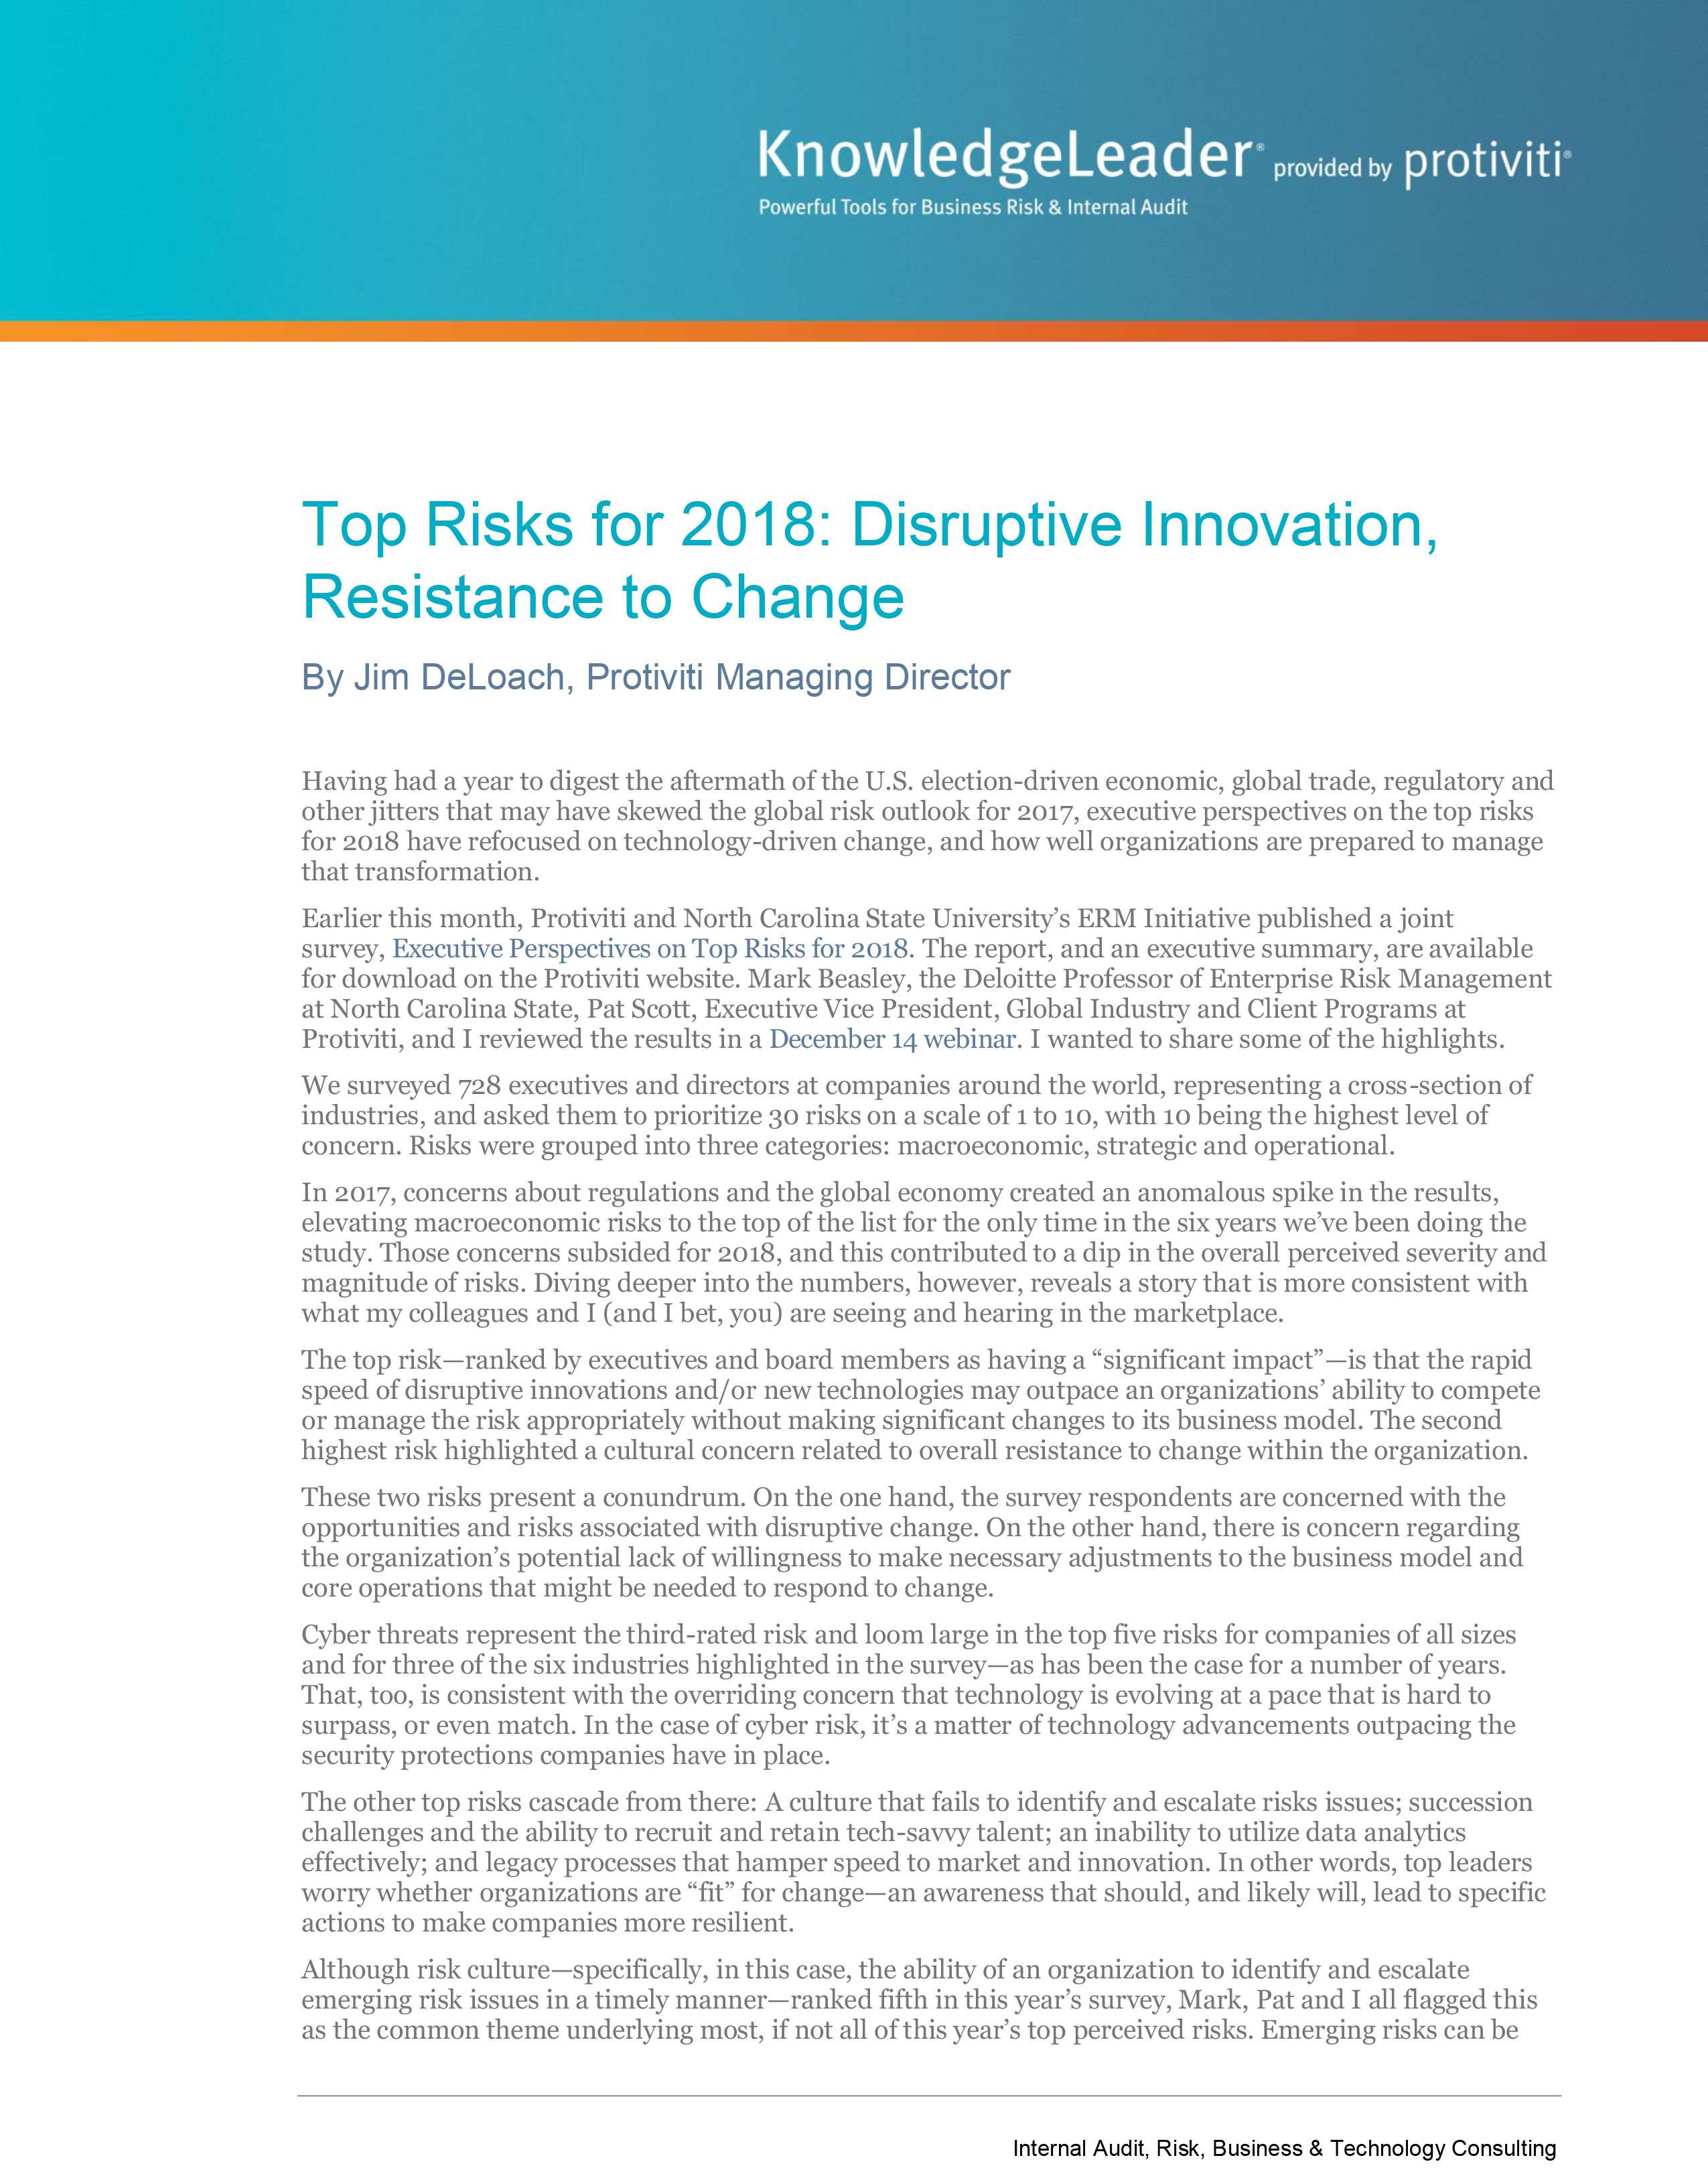 Screenshot of the first page of Top Risks for 2018 - Disruptive Innovation, Resistance to Change